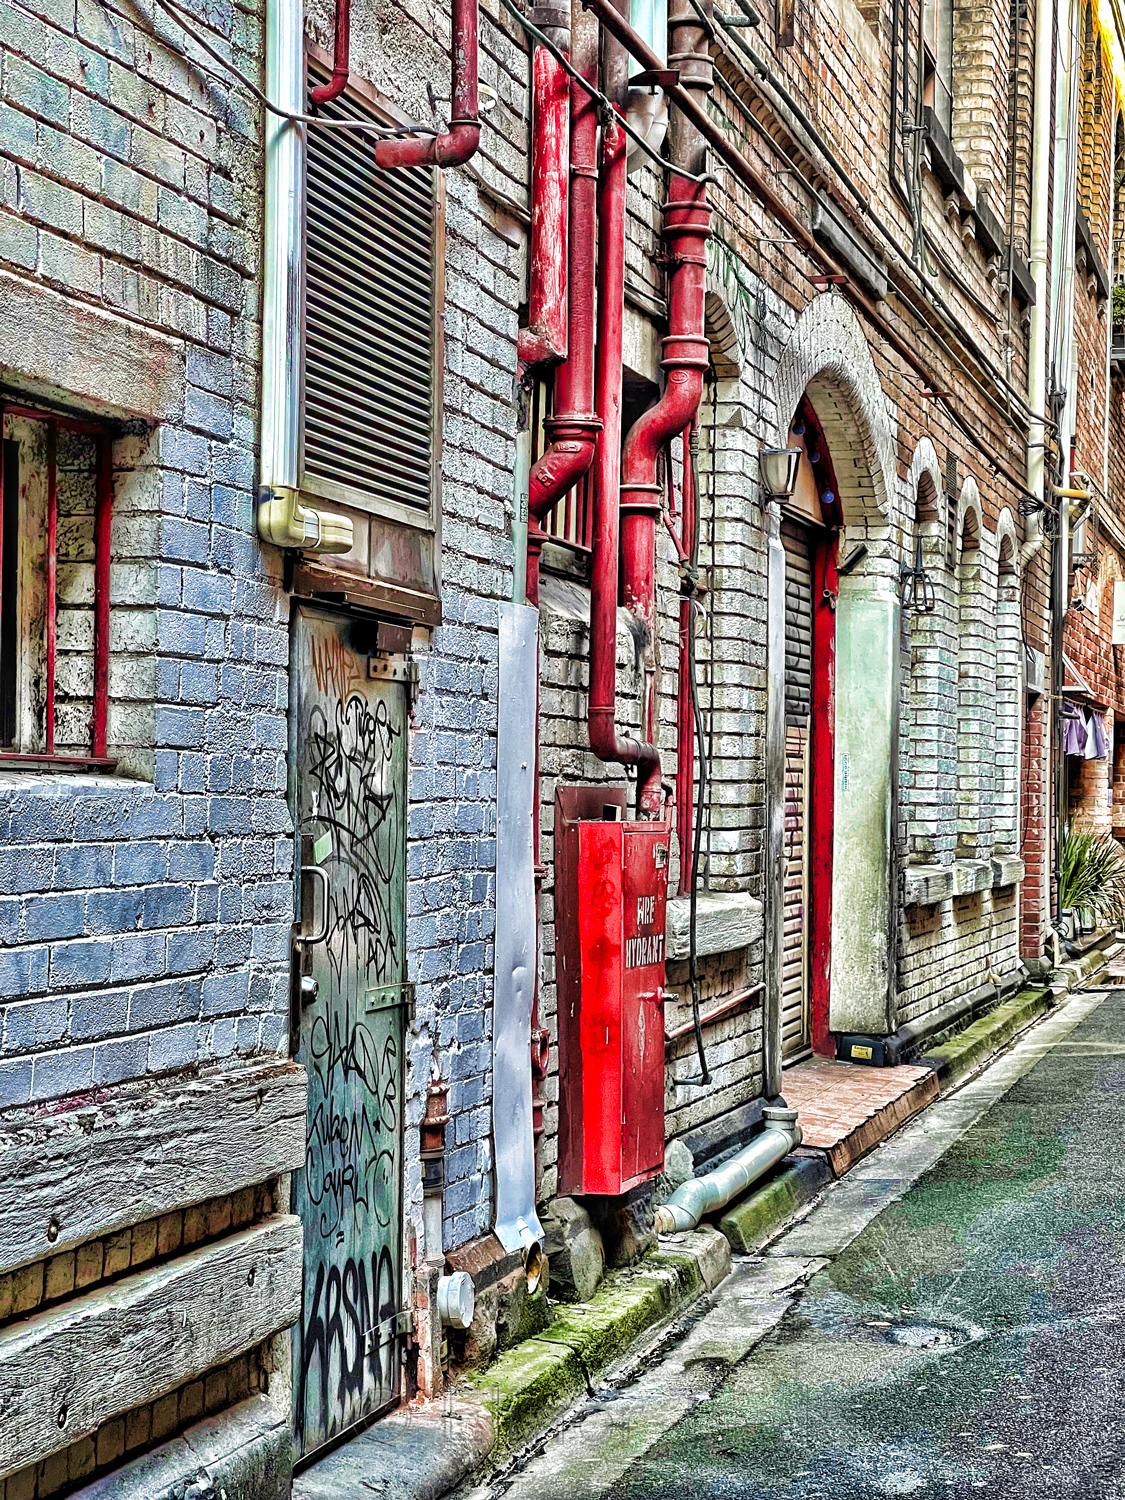 Fire Hydrant, Melbourne